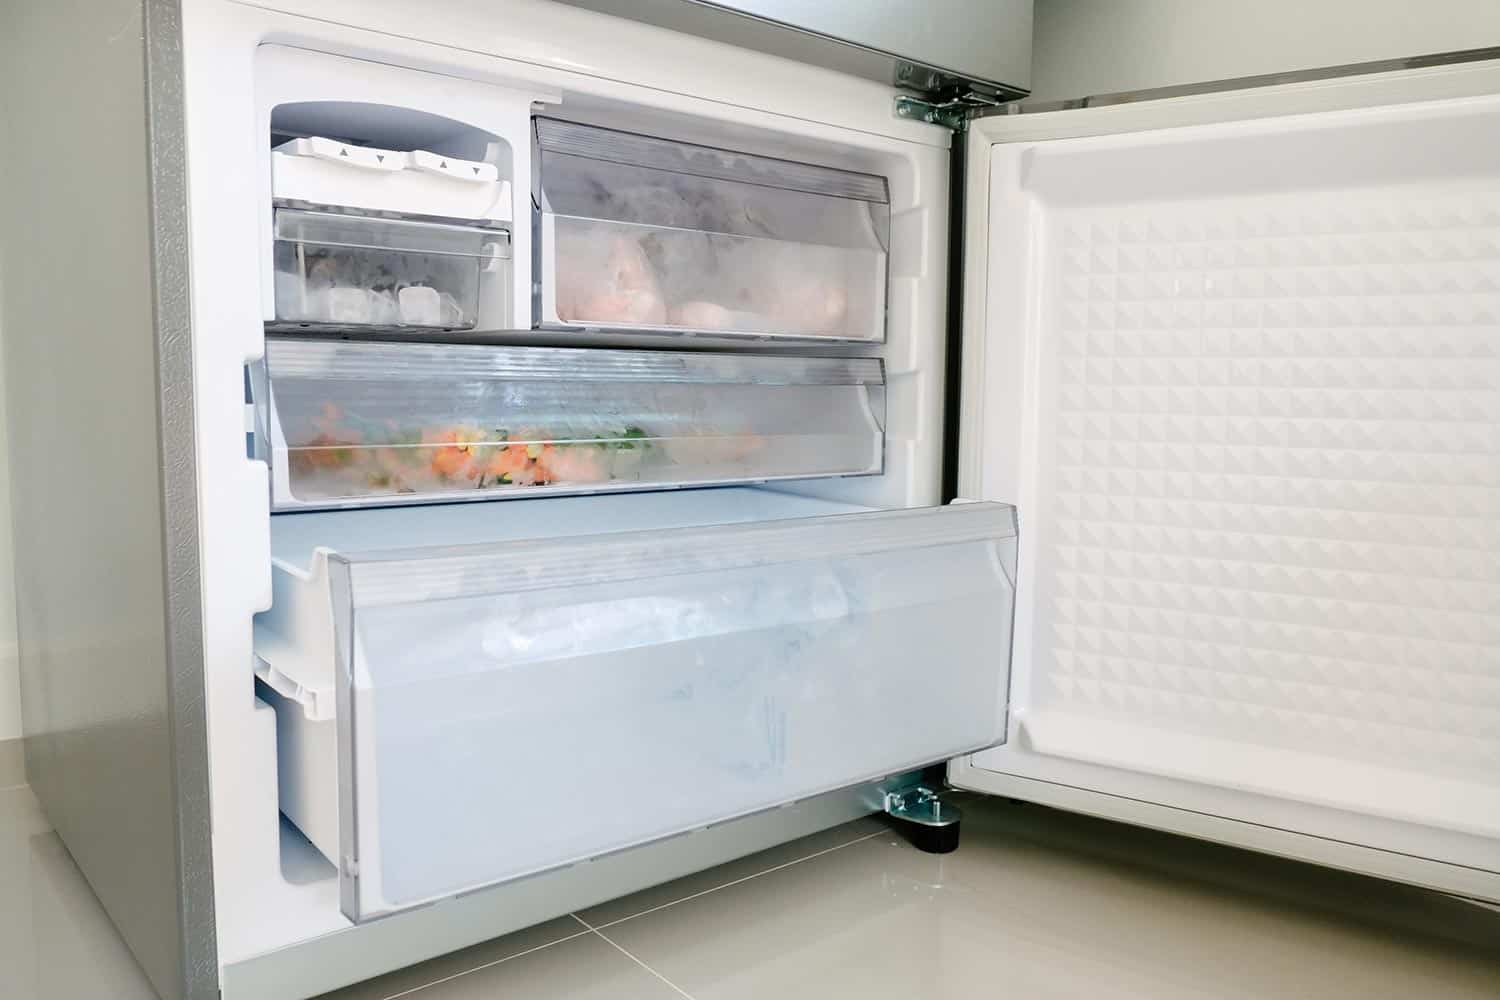 Bottom freezer of the refrigerator with drawer is opened